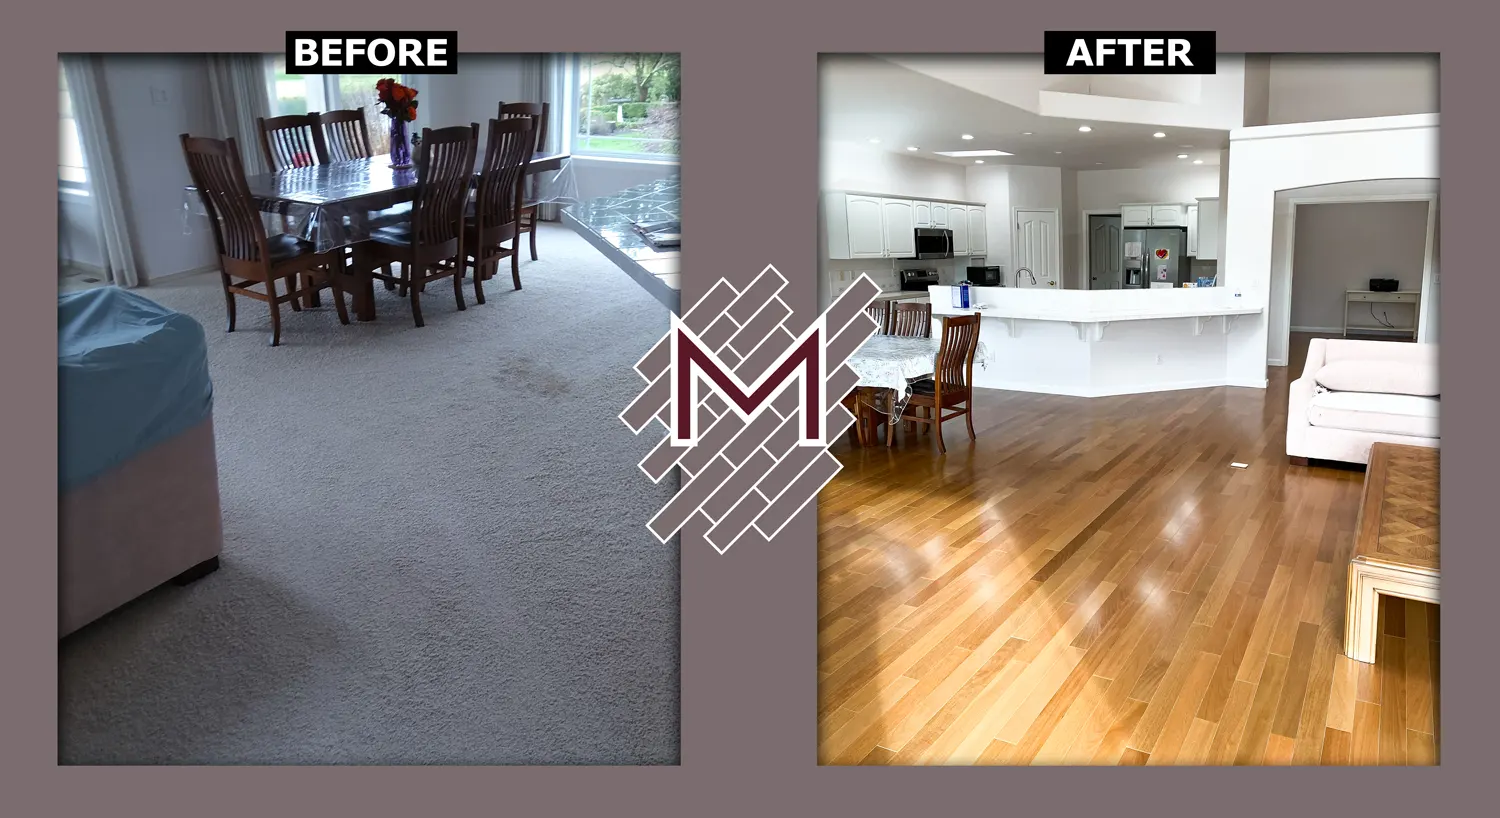 Before and after picture showing the old floor and the new floor. New flooring installation by Modern Flooring Services